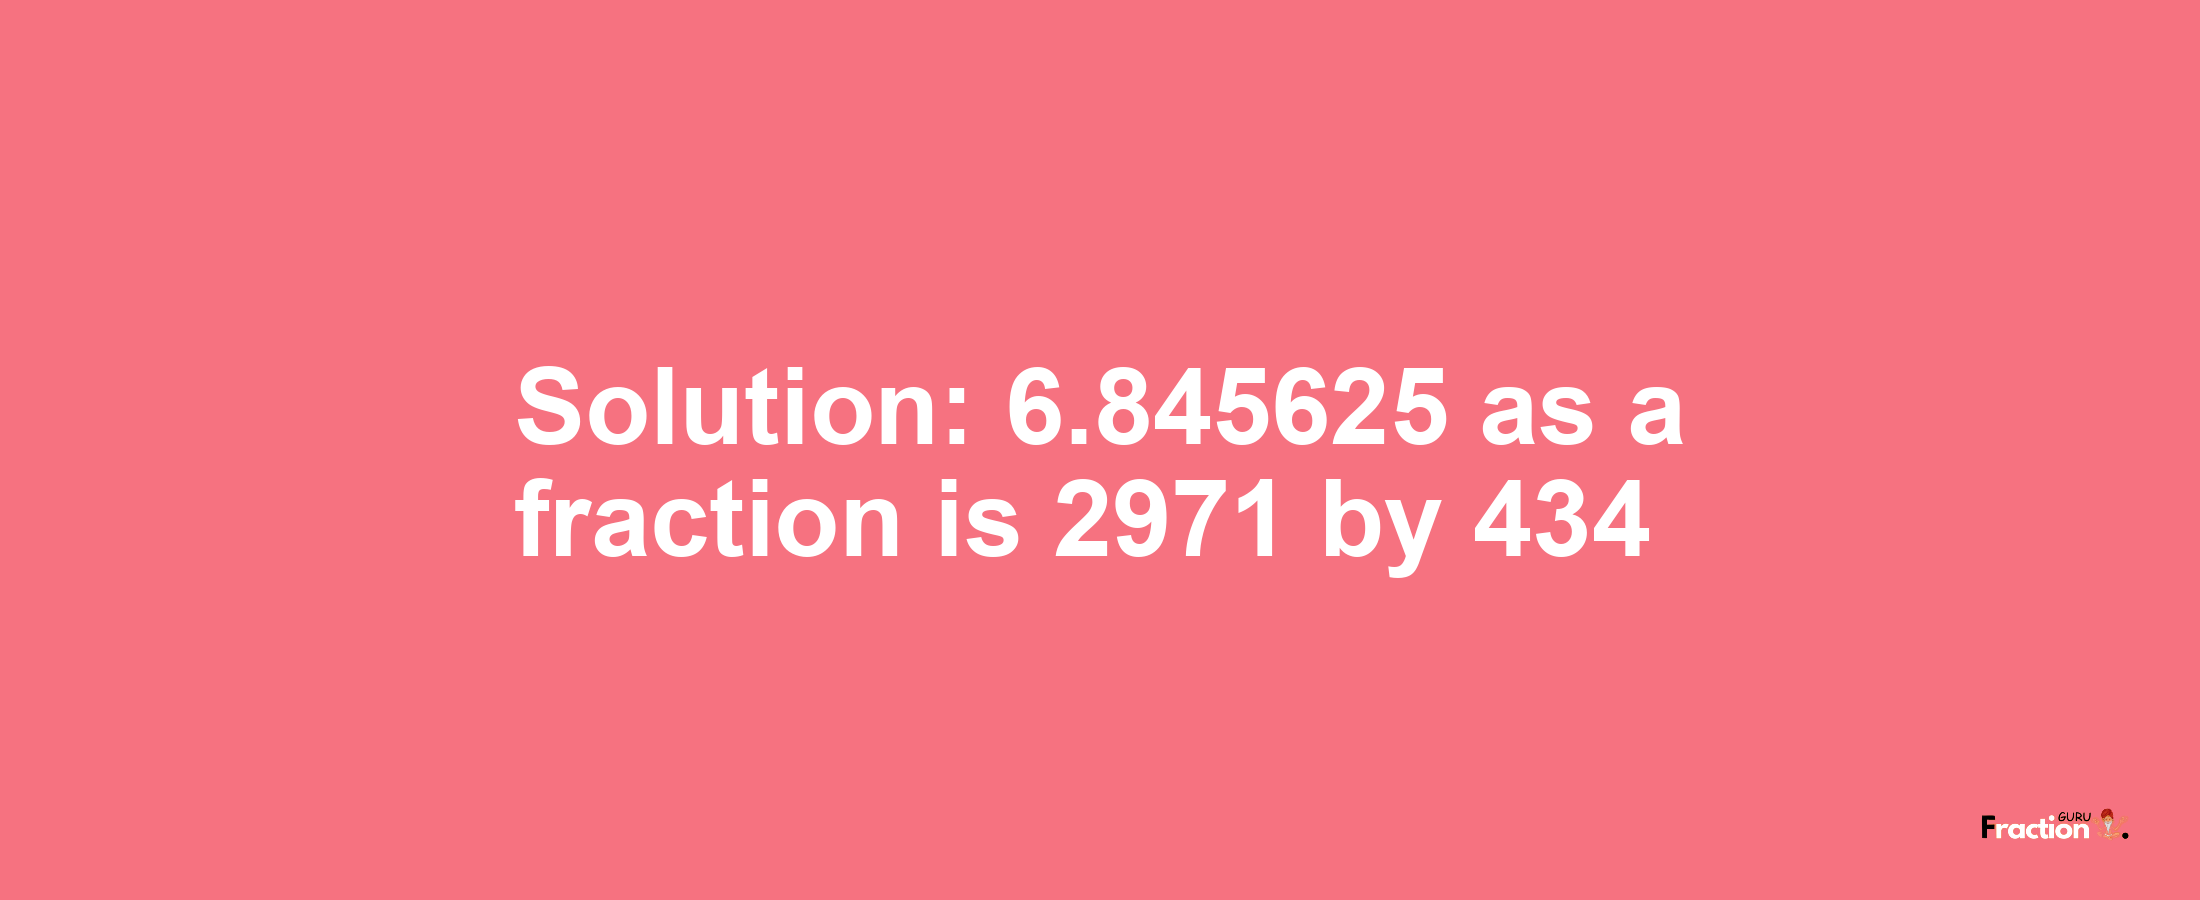 Solution:6.845625 as a fraction is 2971/434